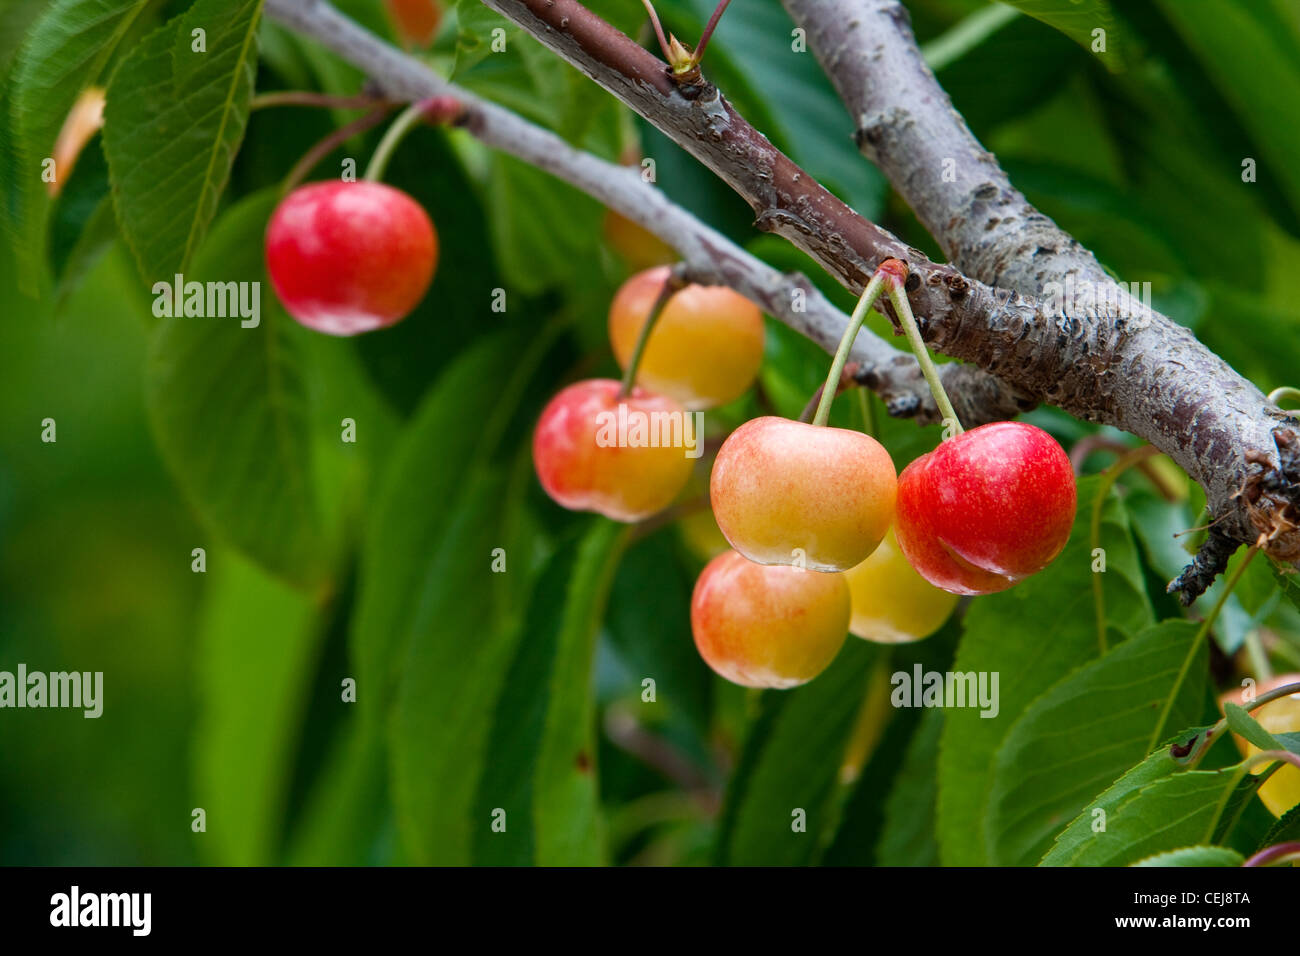 Agriculture - Closeup of ripening Bing cherries on the tree in early Spring / near Dinuba, California, USA. Stock Photo